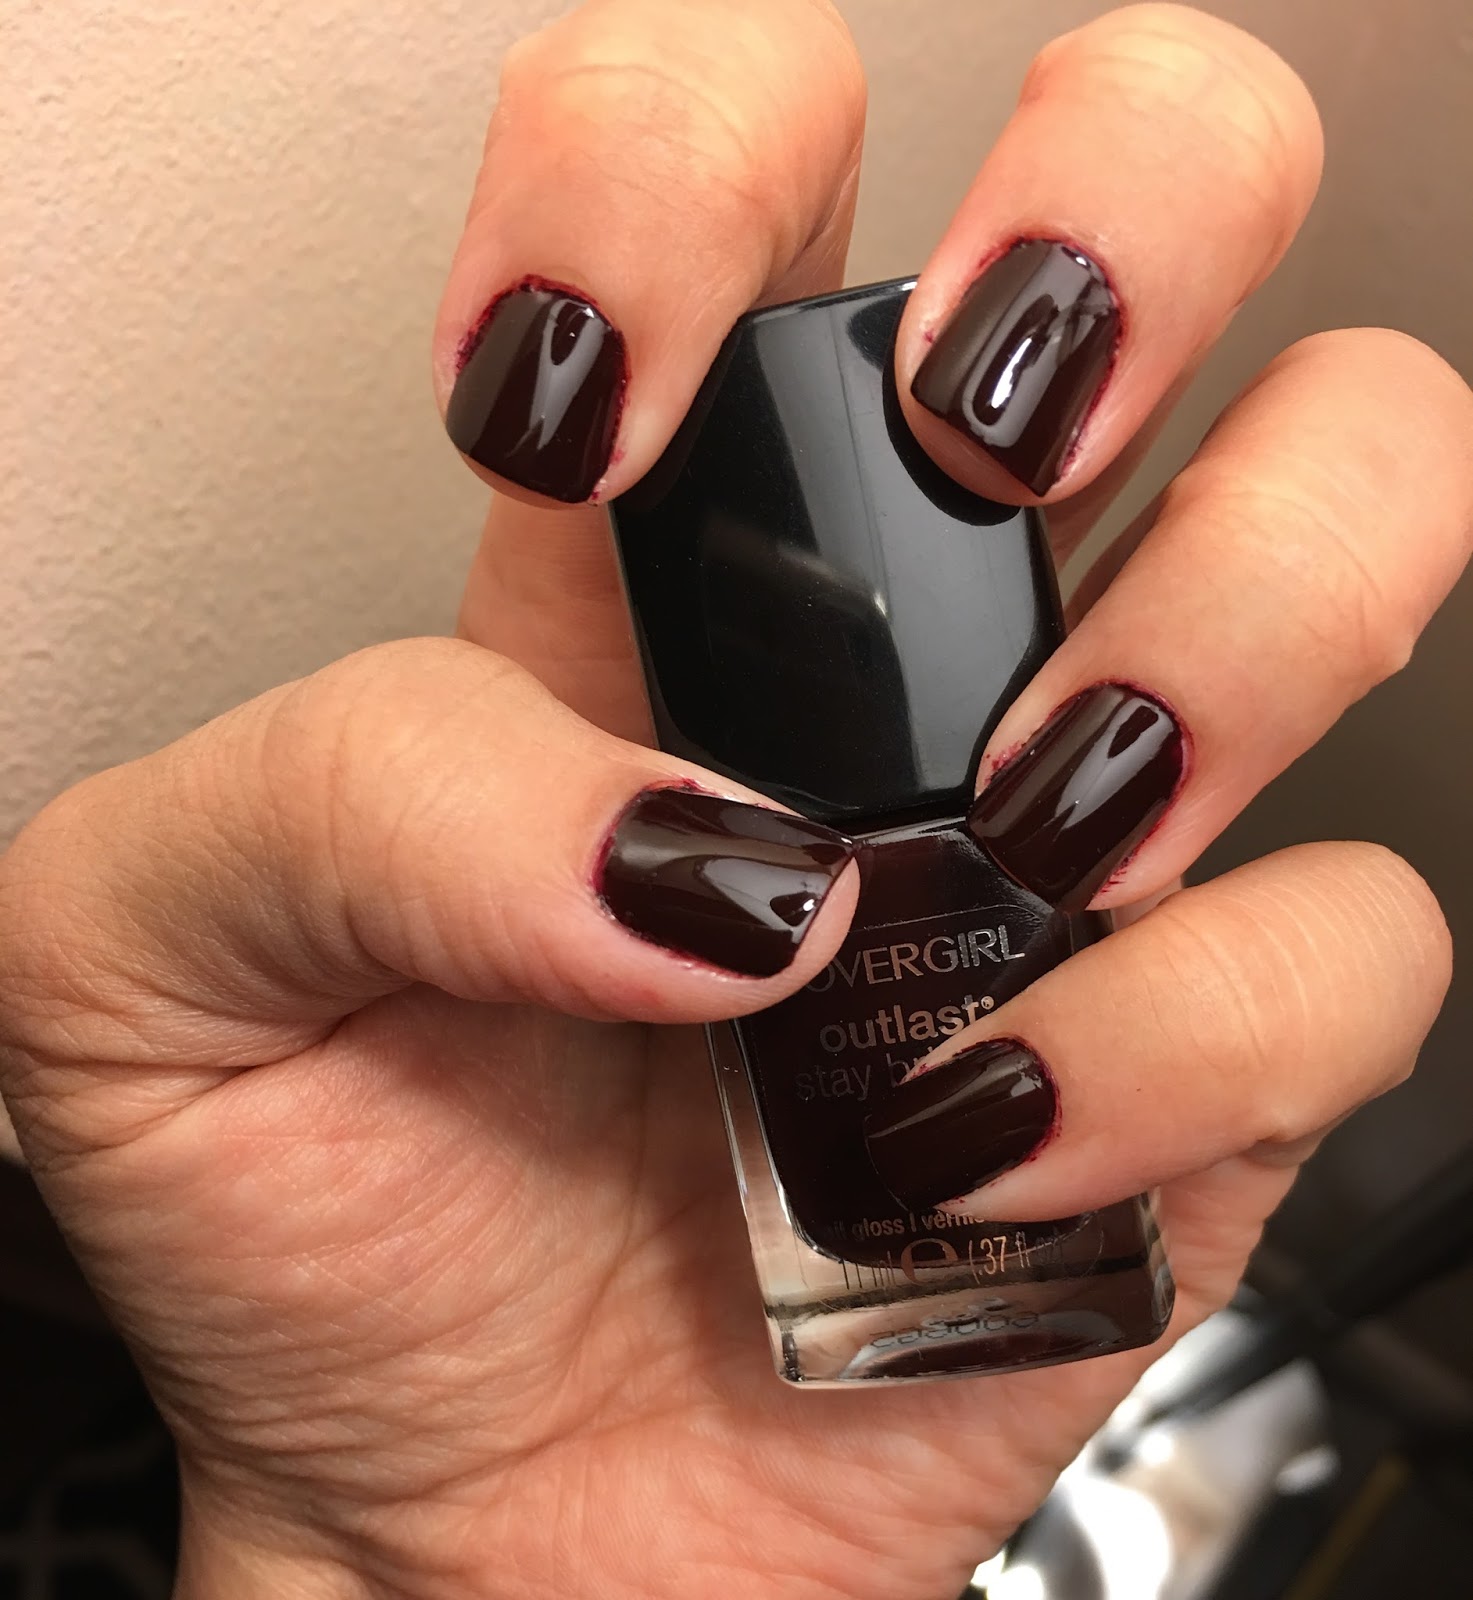 Manicure of the Week/First Impressions: Dark Autumn Nails